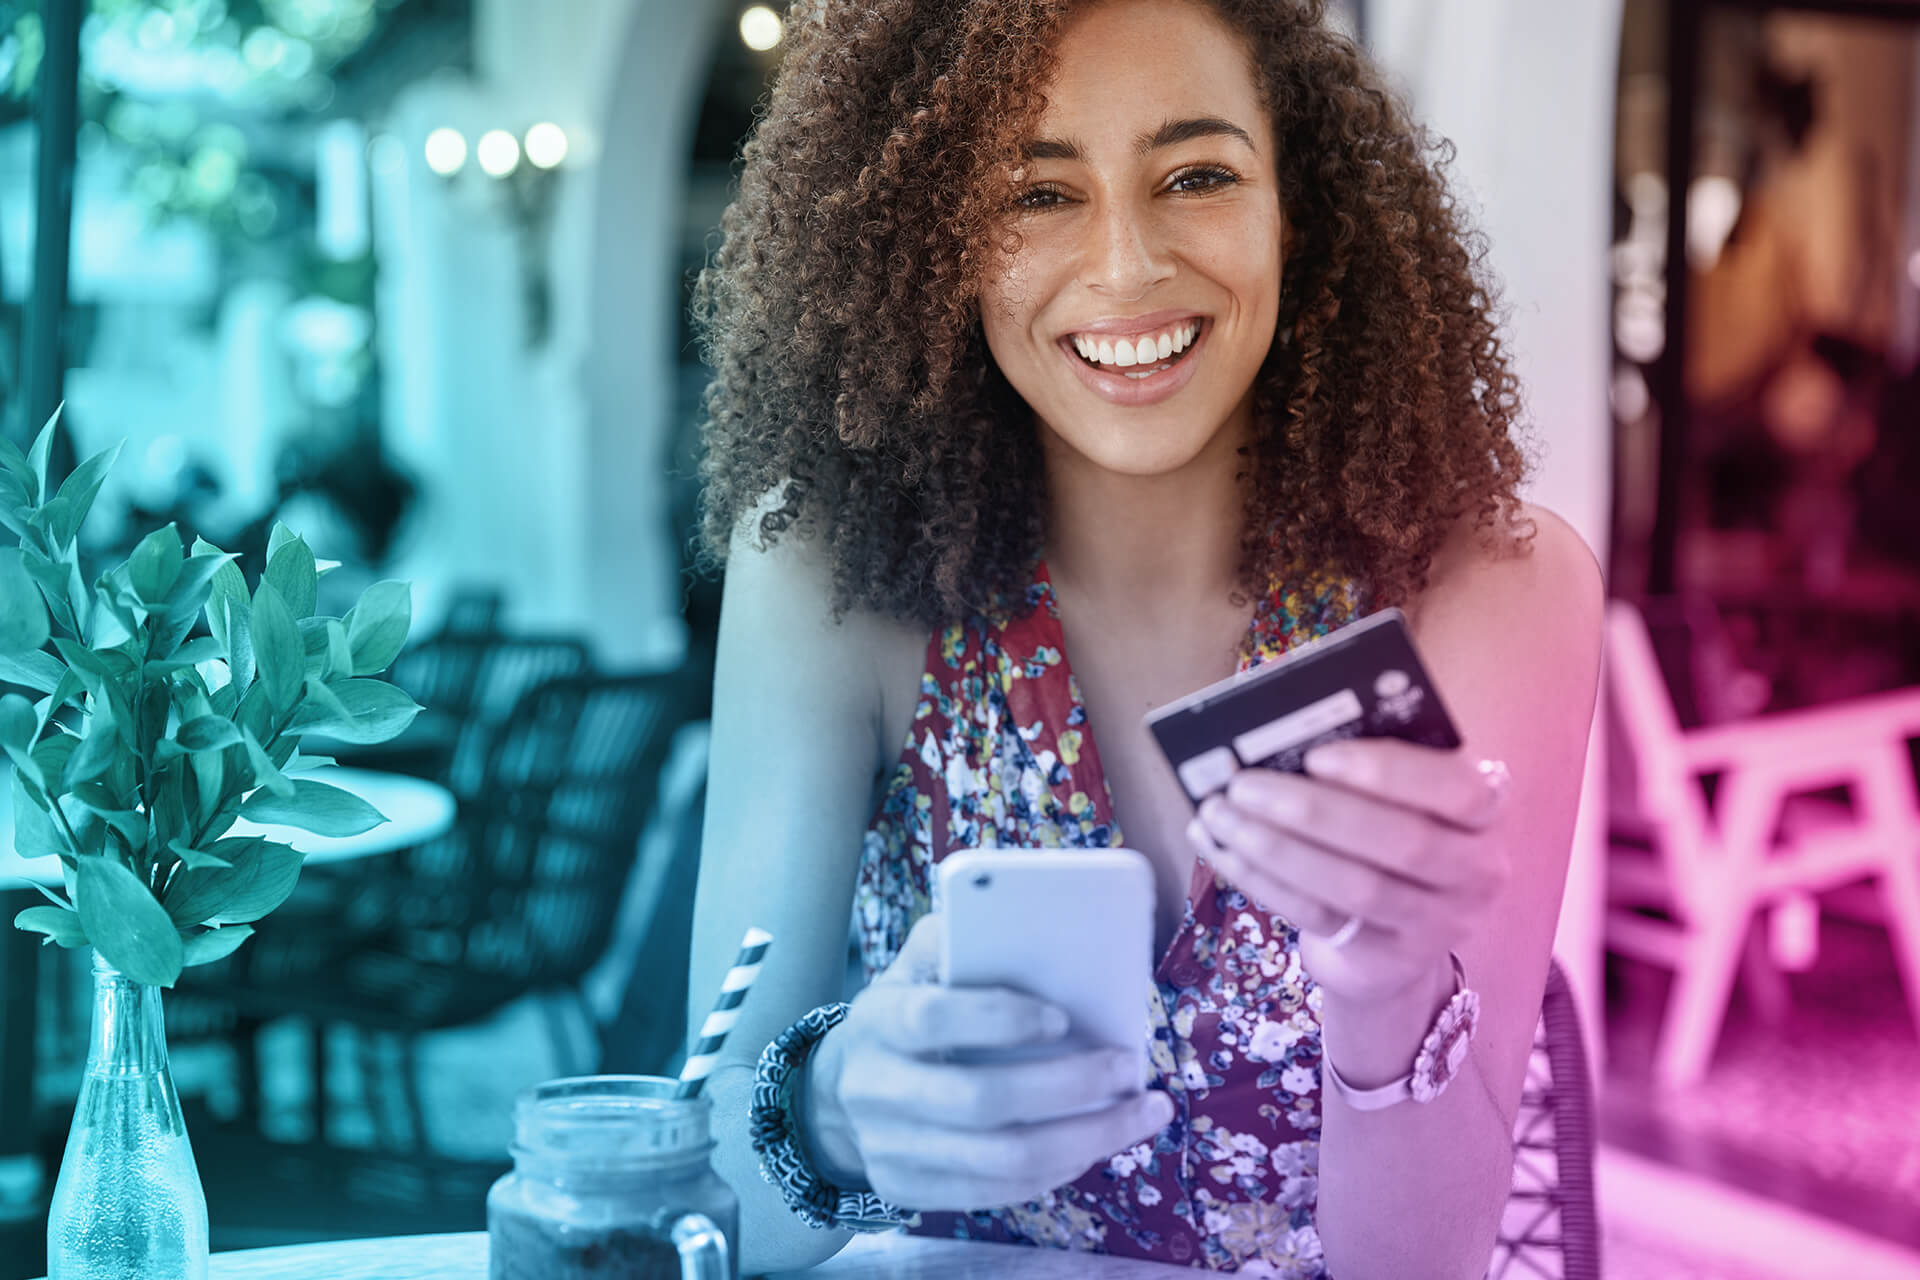 internet-banking-ecommerce-concept-happy-young-smiling-female-with-afro-hairstyle-uses-modern-cell-phone-credit-card-online-shopping (1)